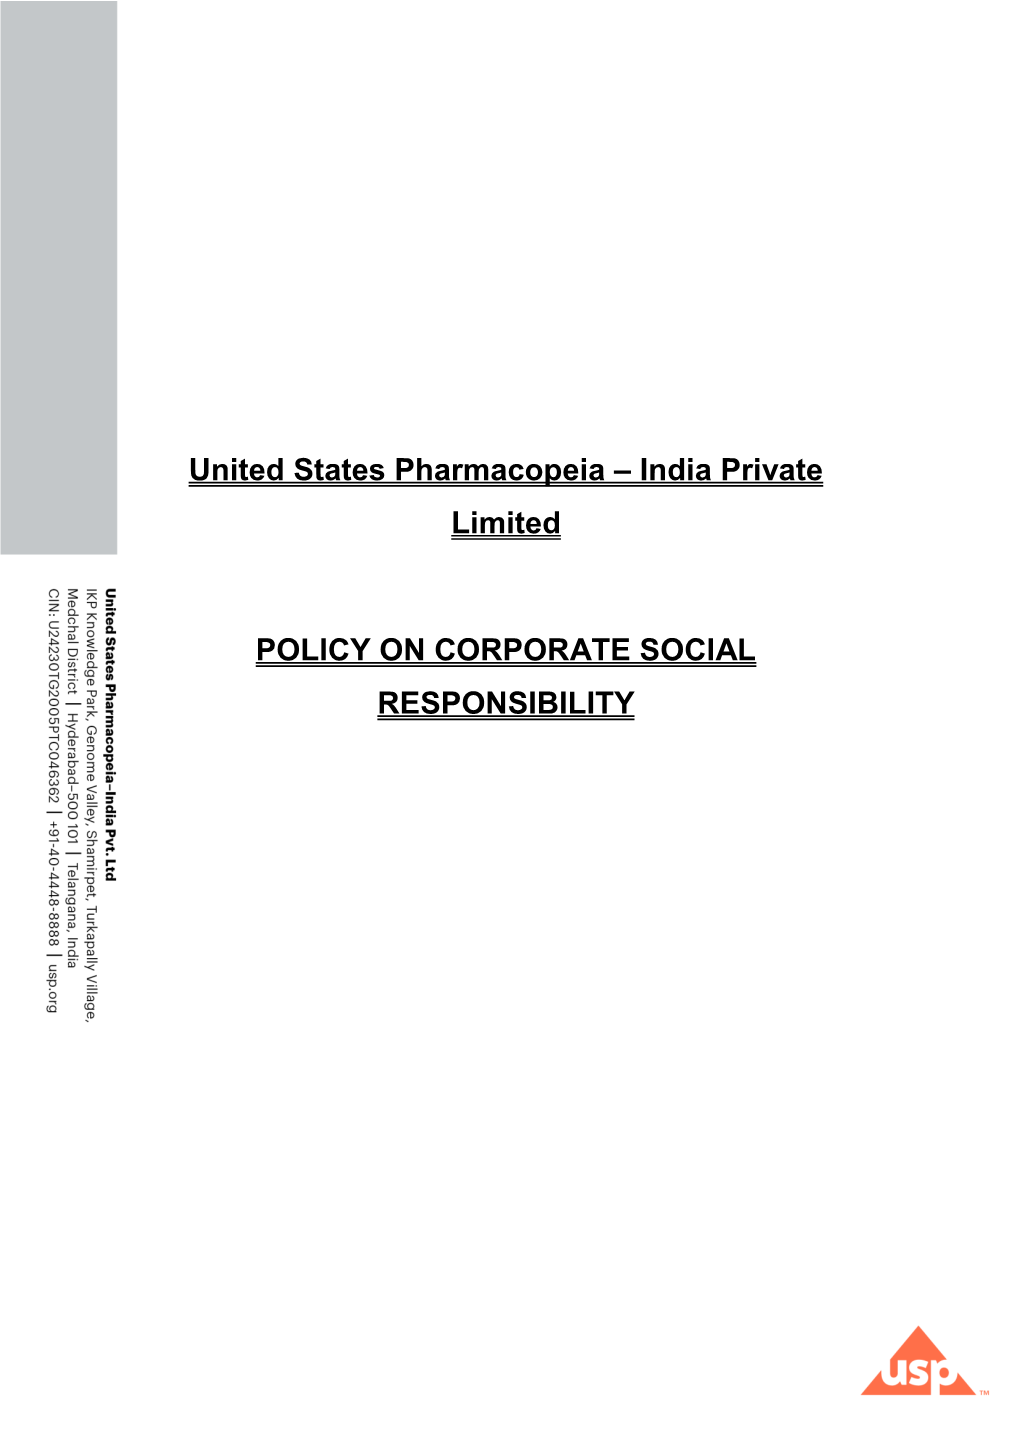 United States Pharmacopeia – India Private Limited POLICY ON